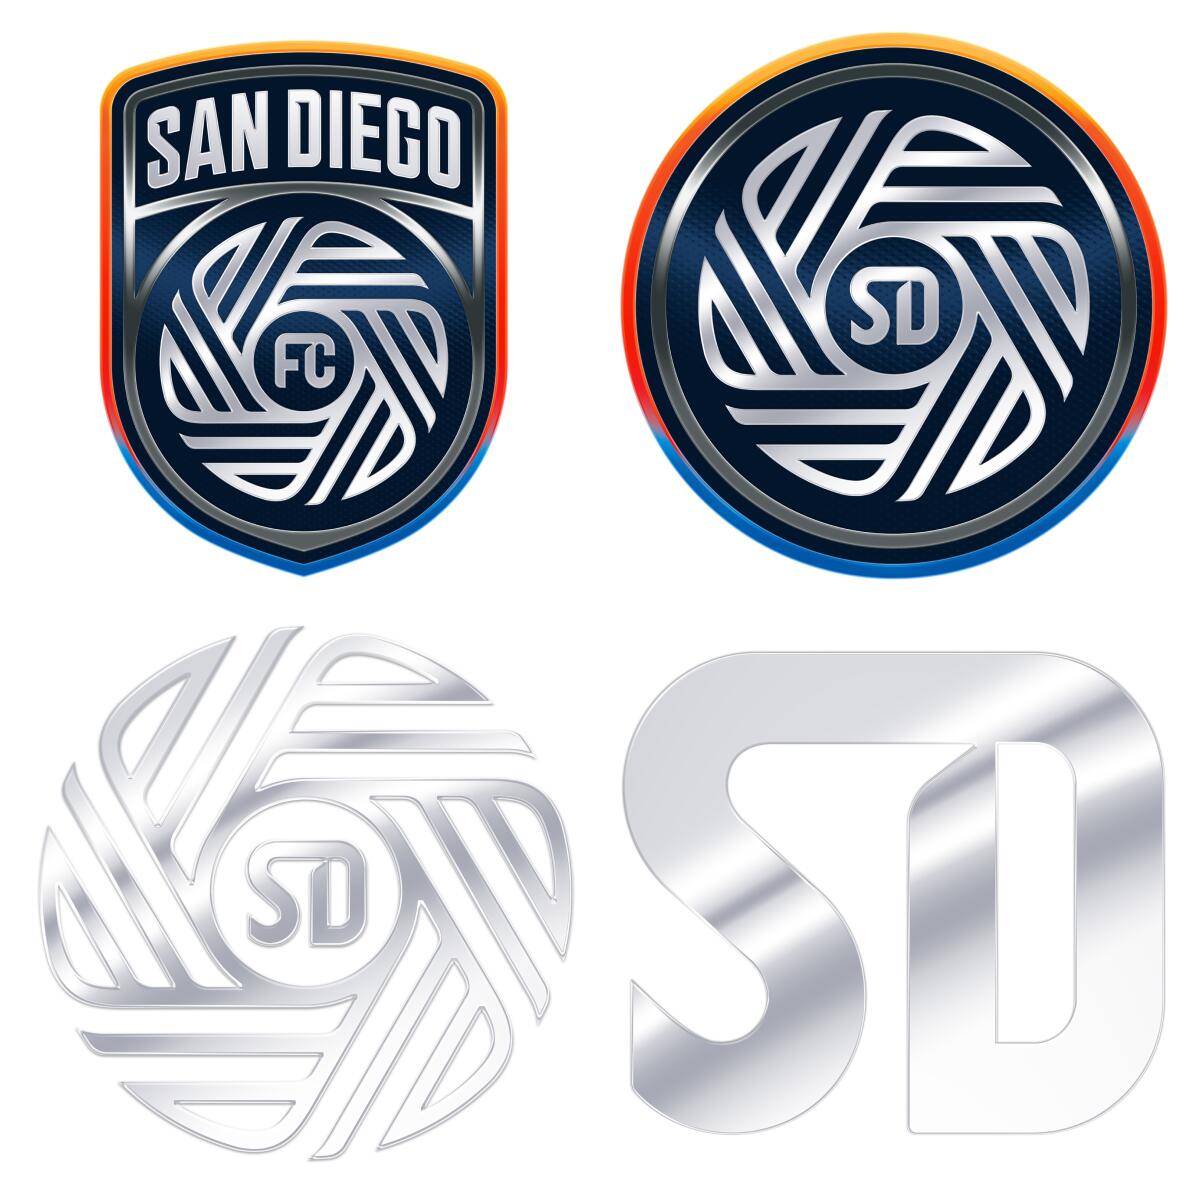 Name, crest, colors for San Diego MLS team leak a day early - The